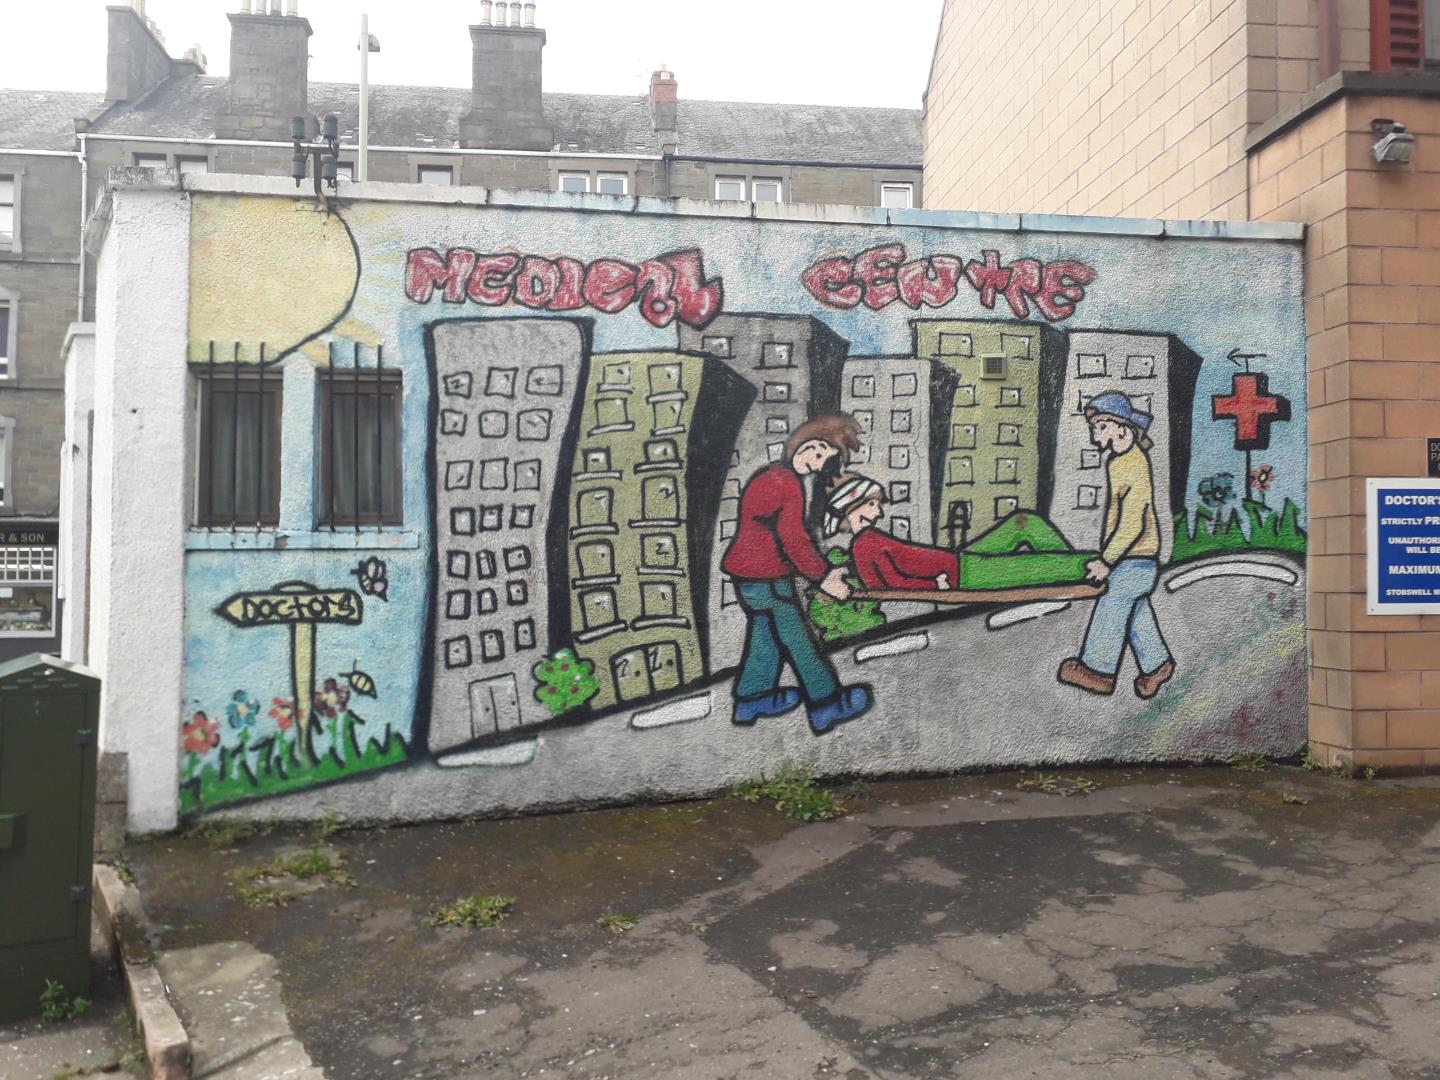 A mural in Stobswell, Dundee.